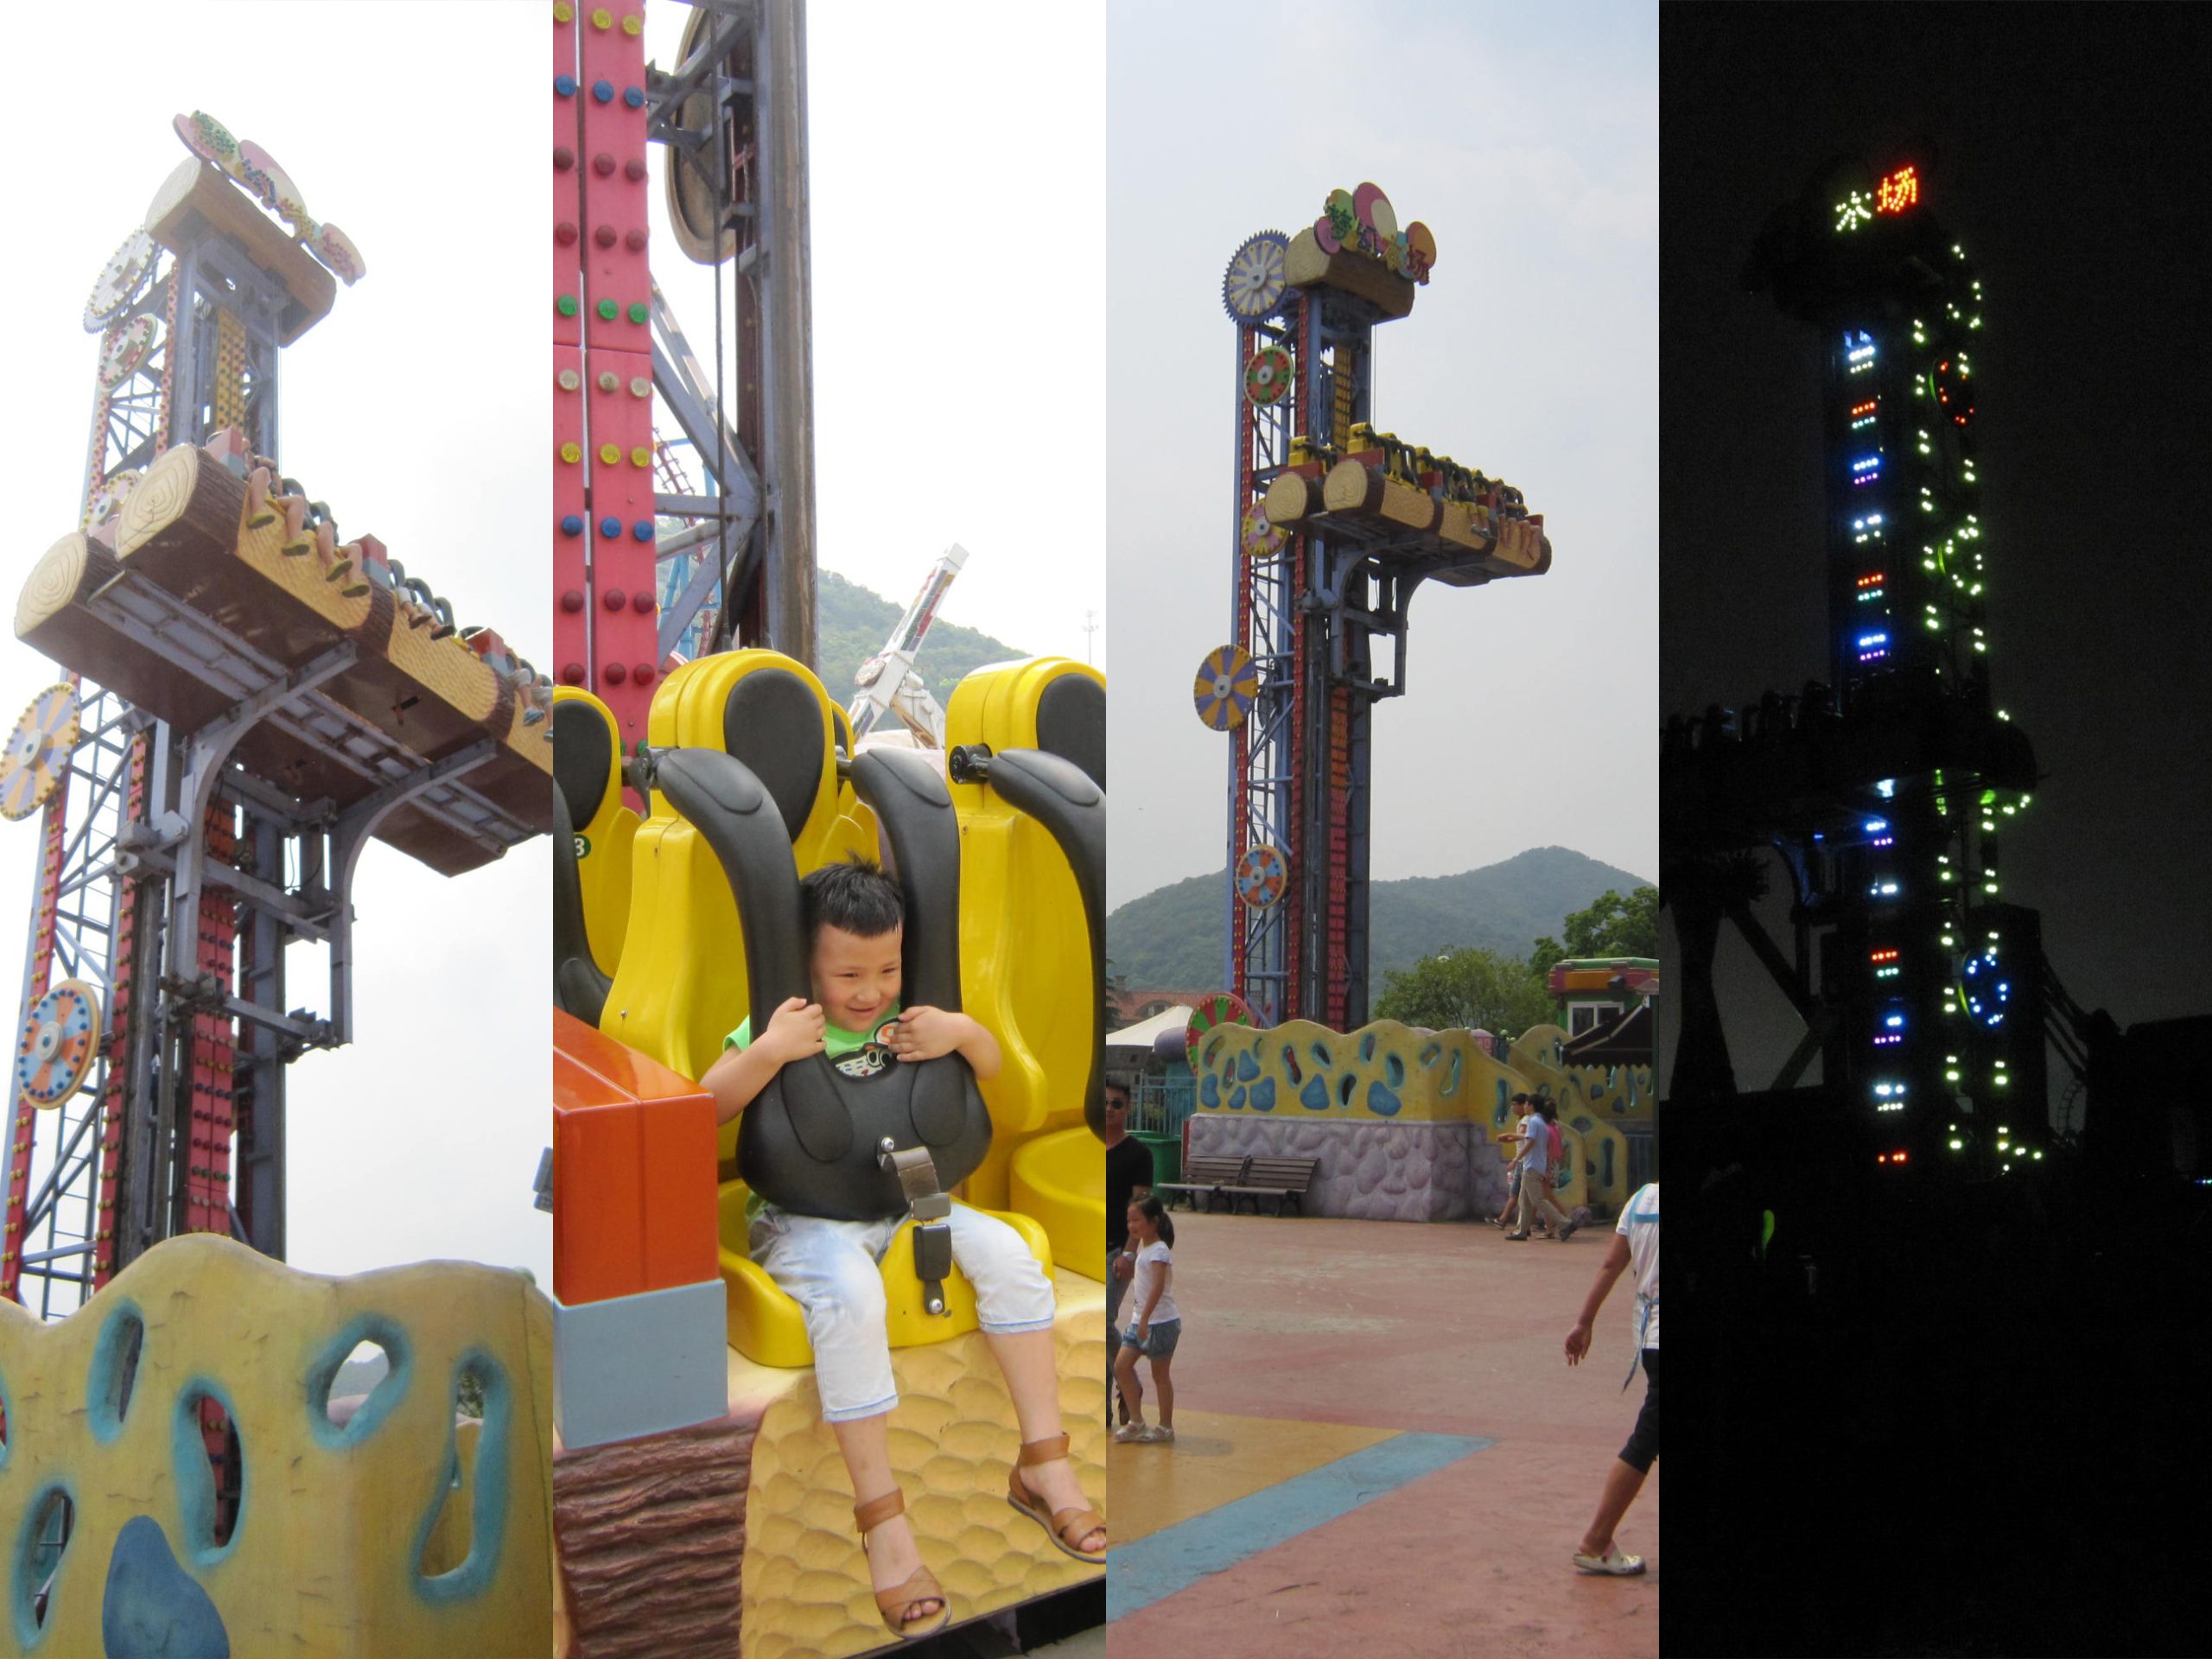 Most Popular Free Fall Rides For Amusement Parks - Made In China